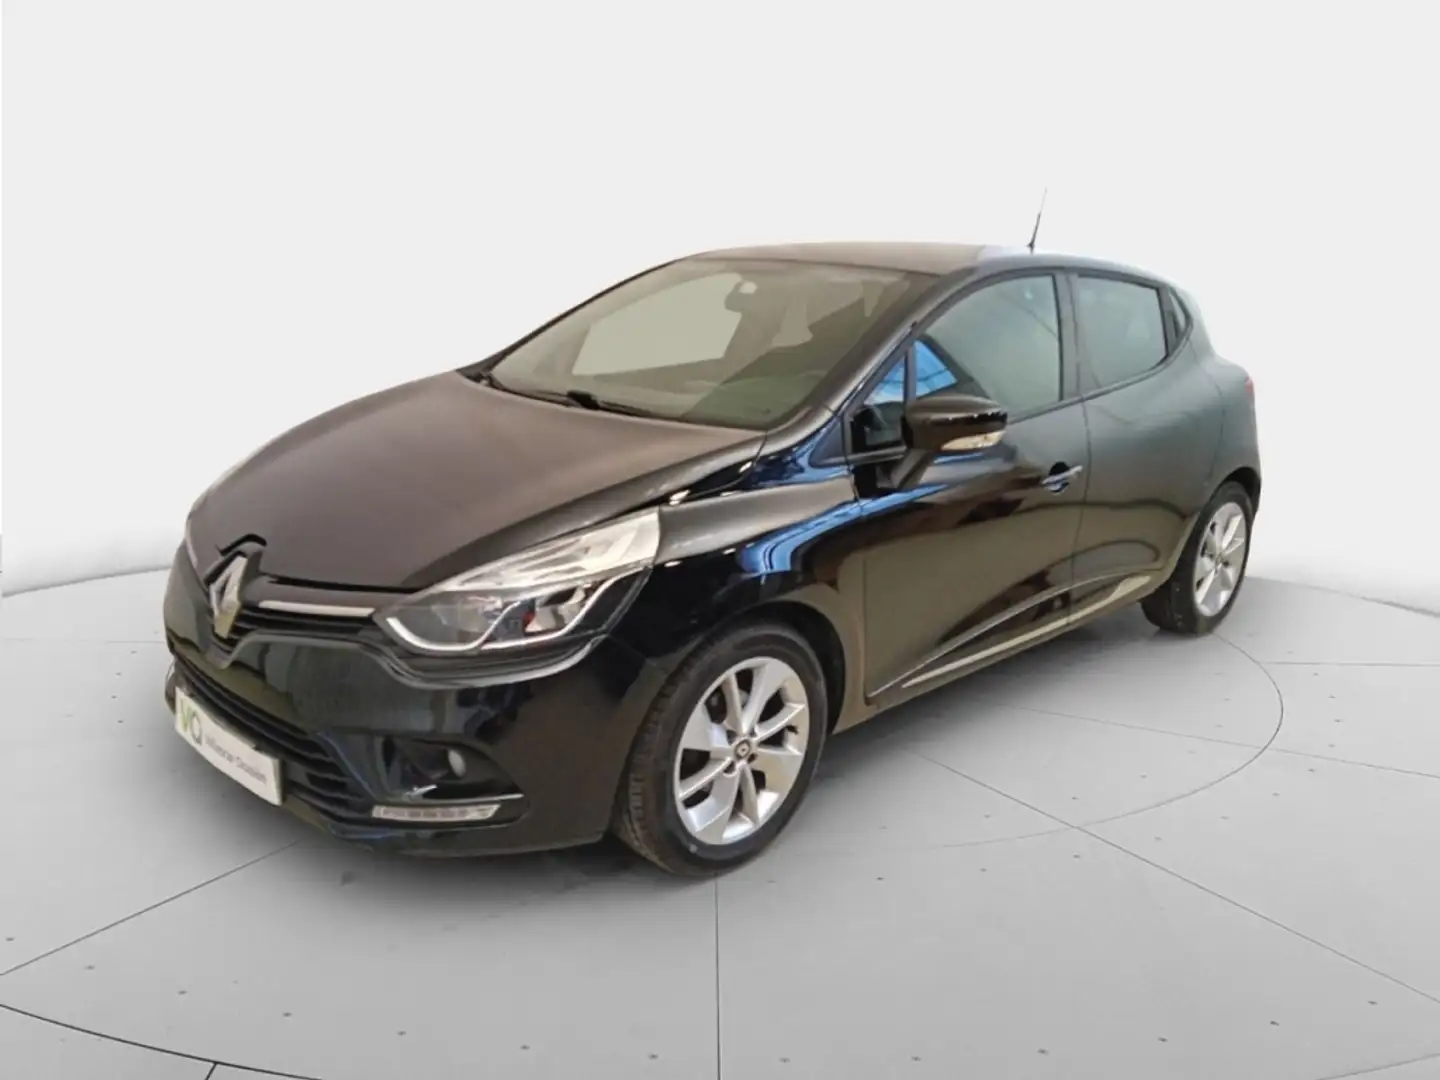 Renault Clio LIMITED 0.9 TCE ENERGY 90 CV 5P Zwart - 2